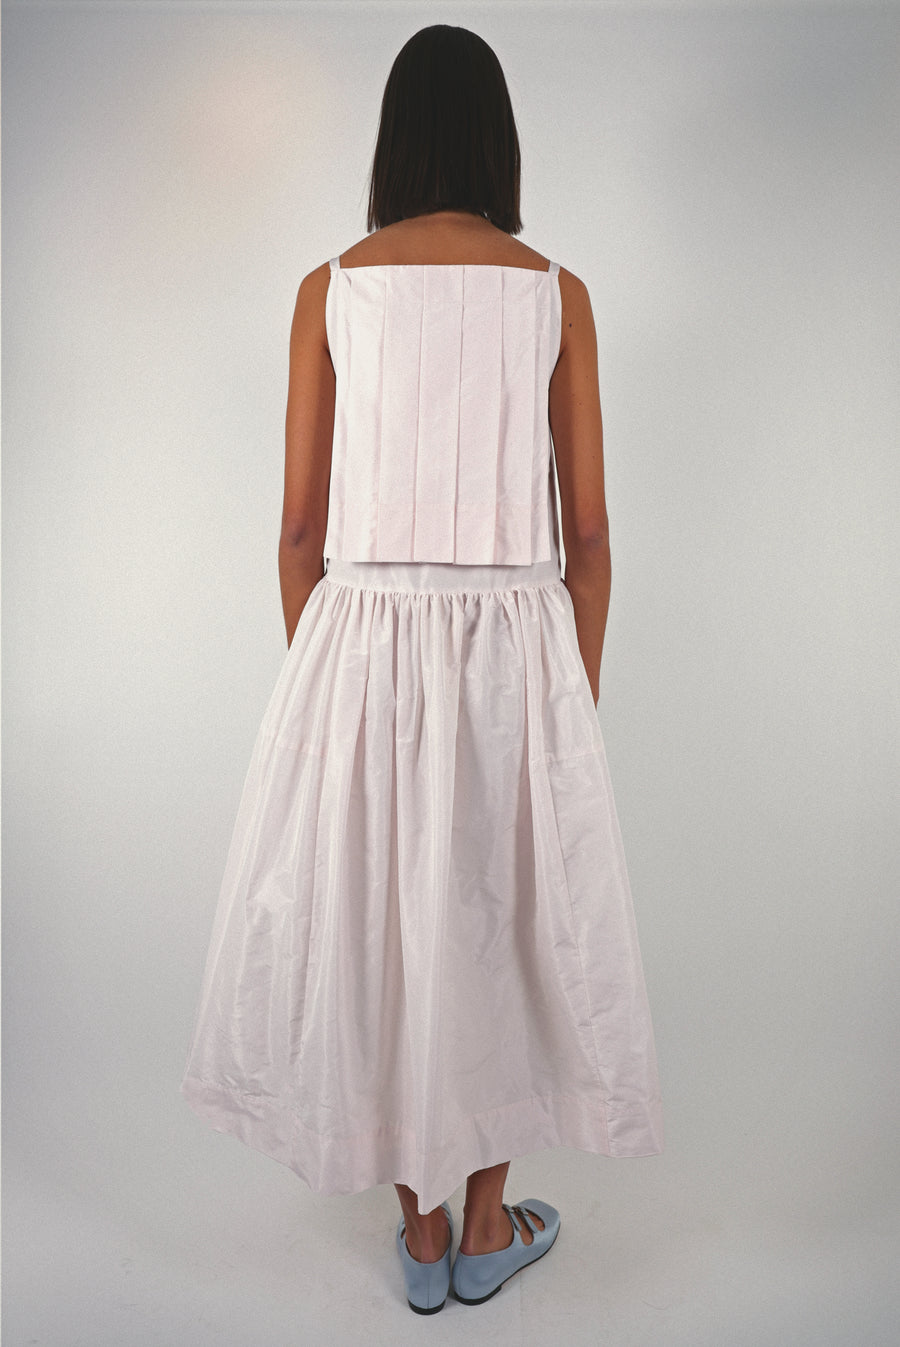 Midi length dress in blush pink taffeta with buttons and cape detail at back on model